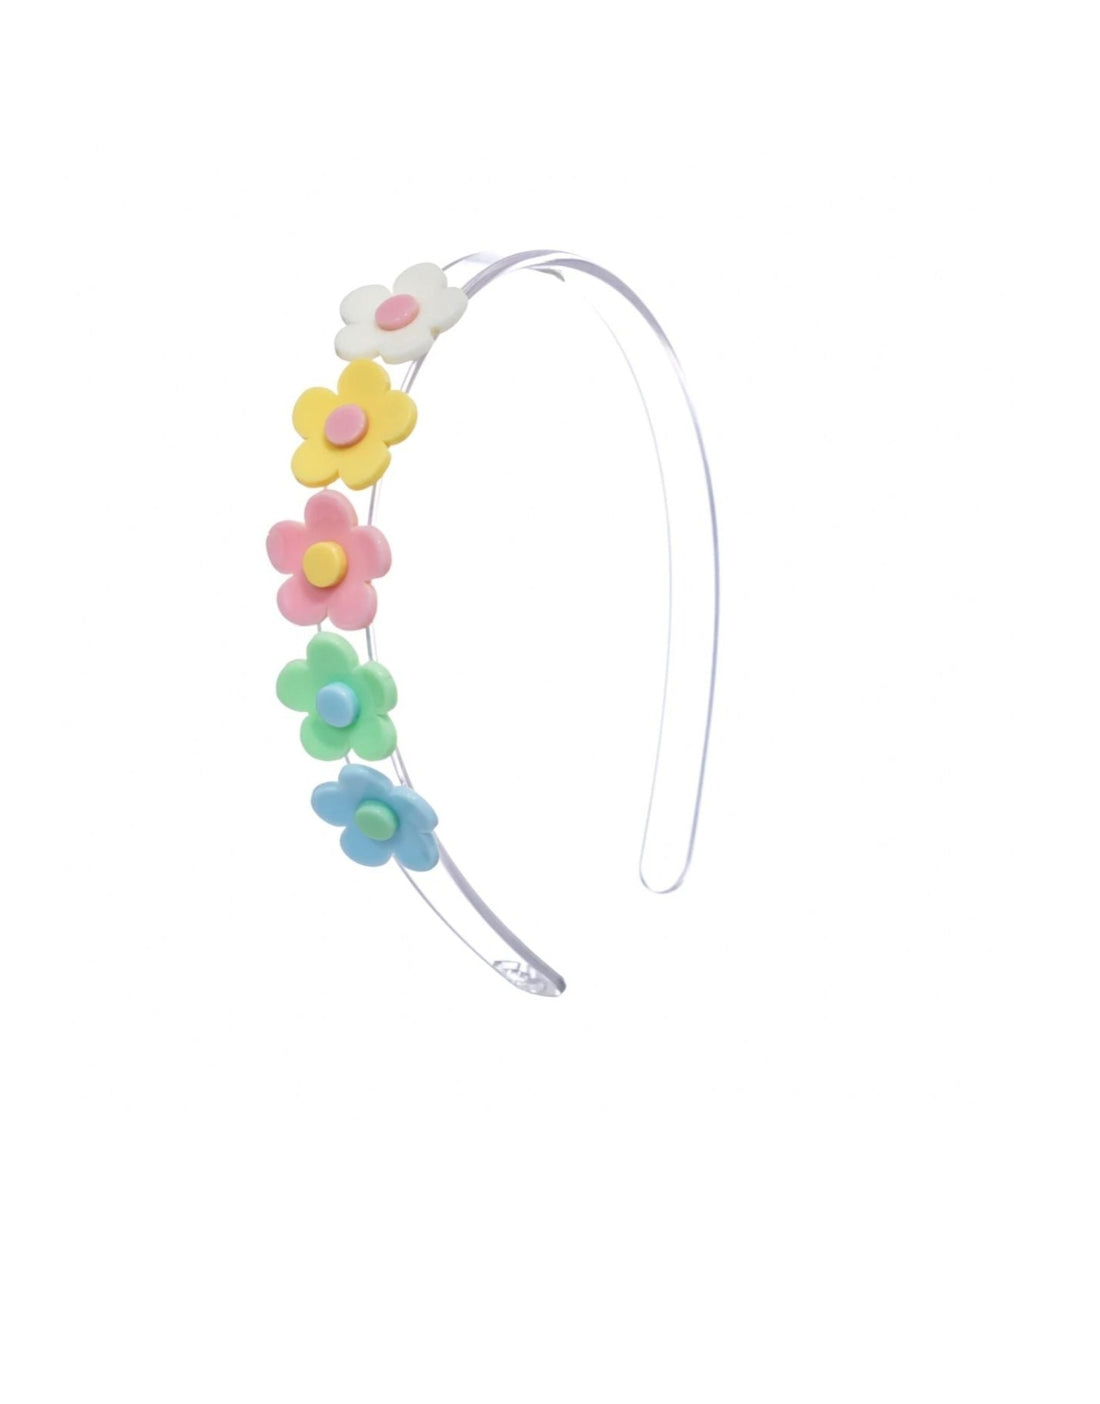 clear headband with 5 pastel flowers on it